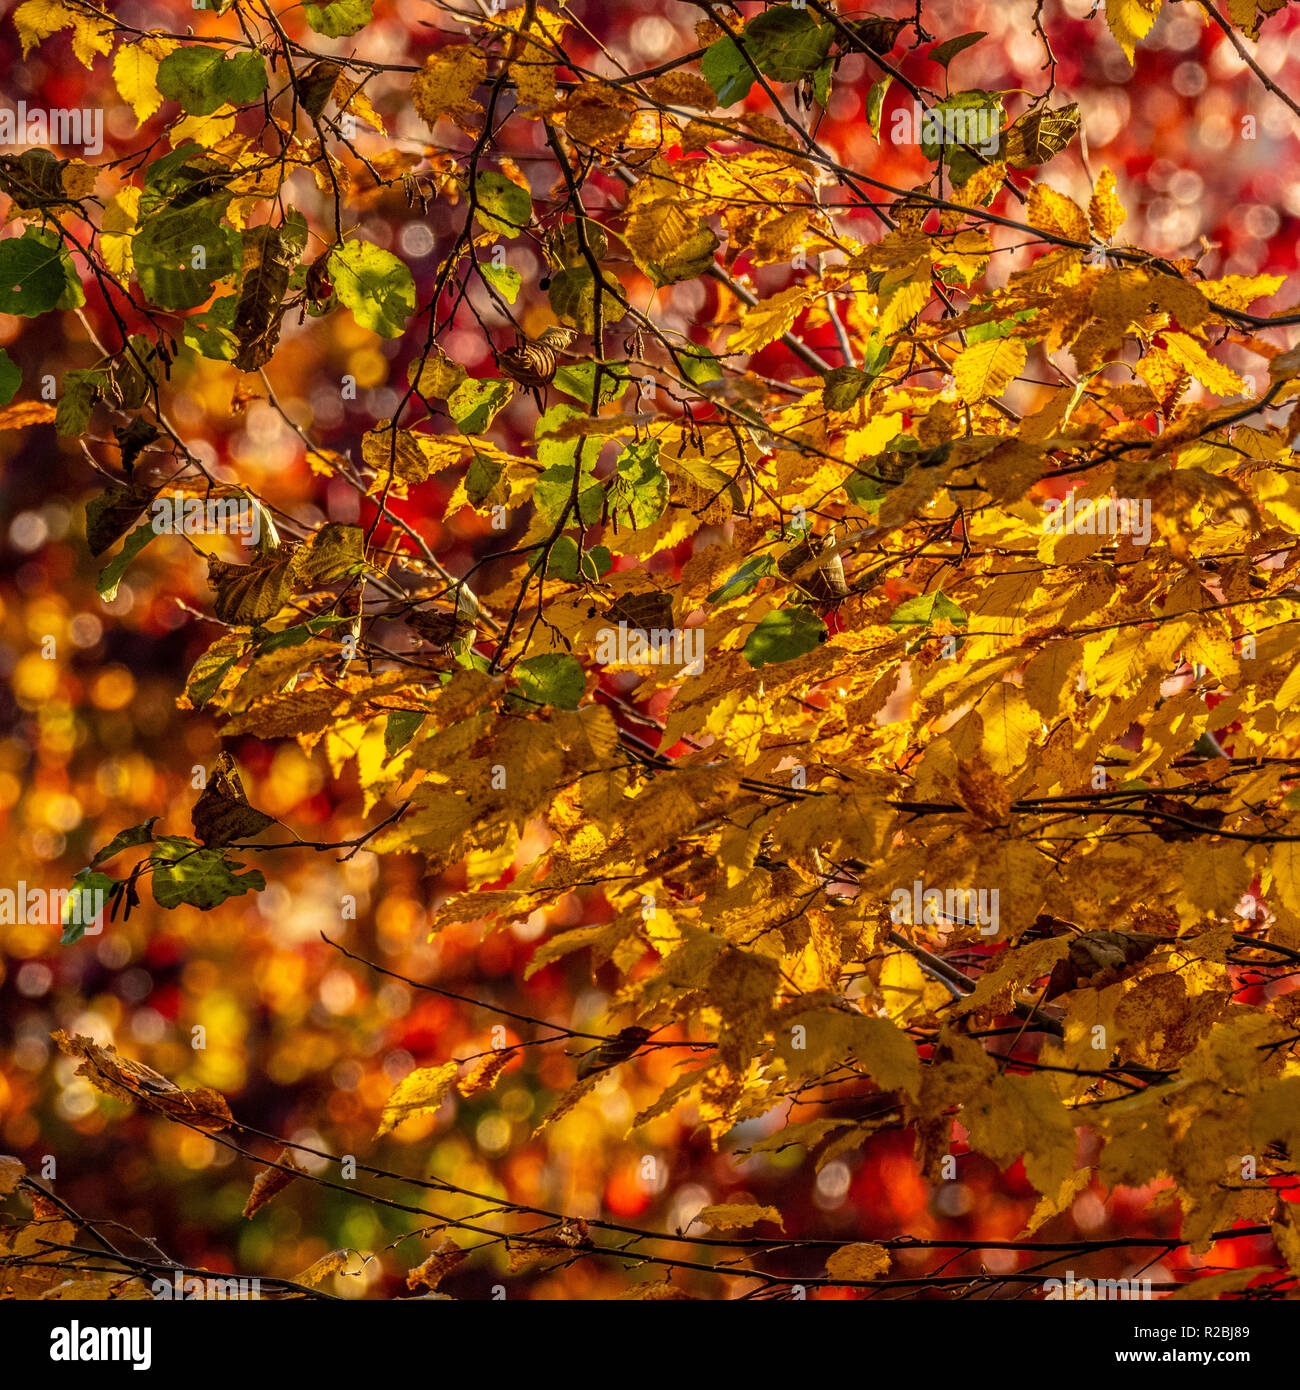 Golden coloured leaves on tree in autumn Stock Photo